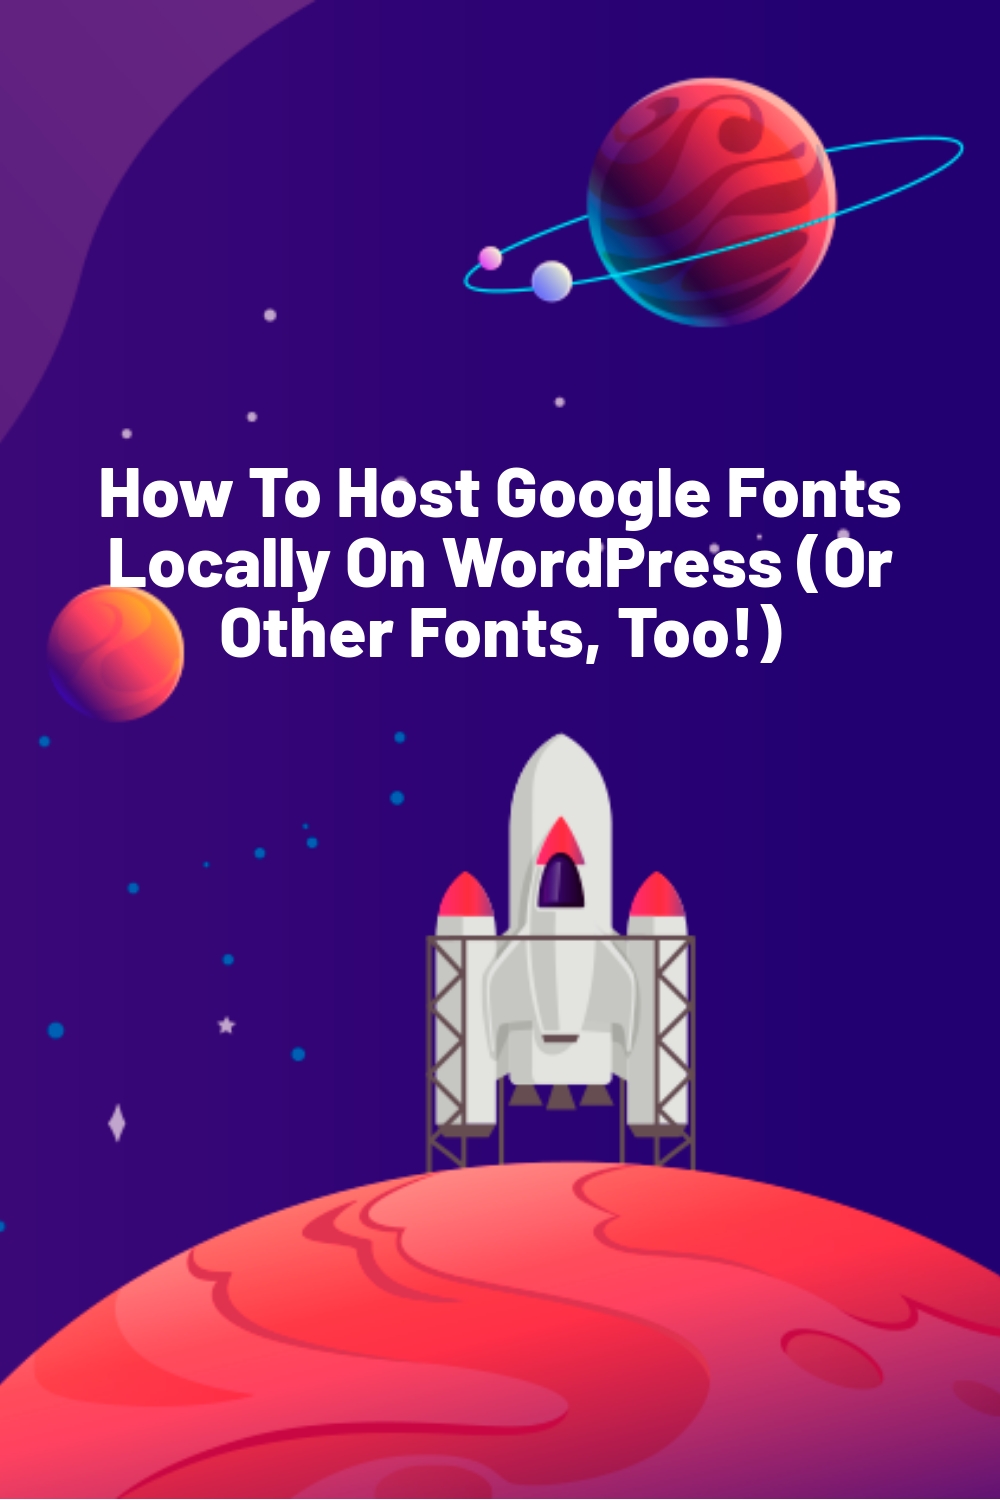 How To Host Google Fonts Locally On WordPress (Or Other Fonts, Too!)